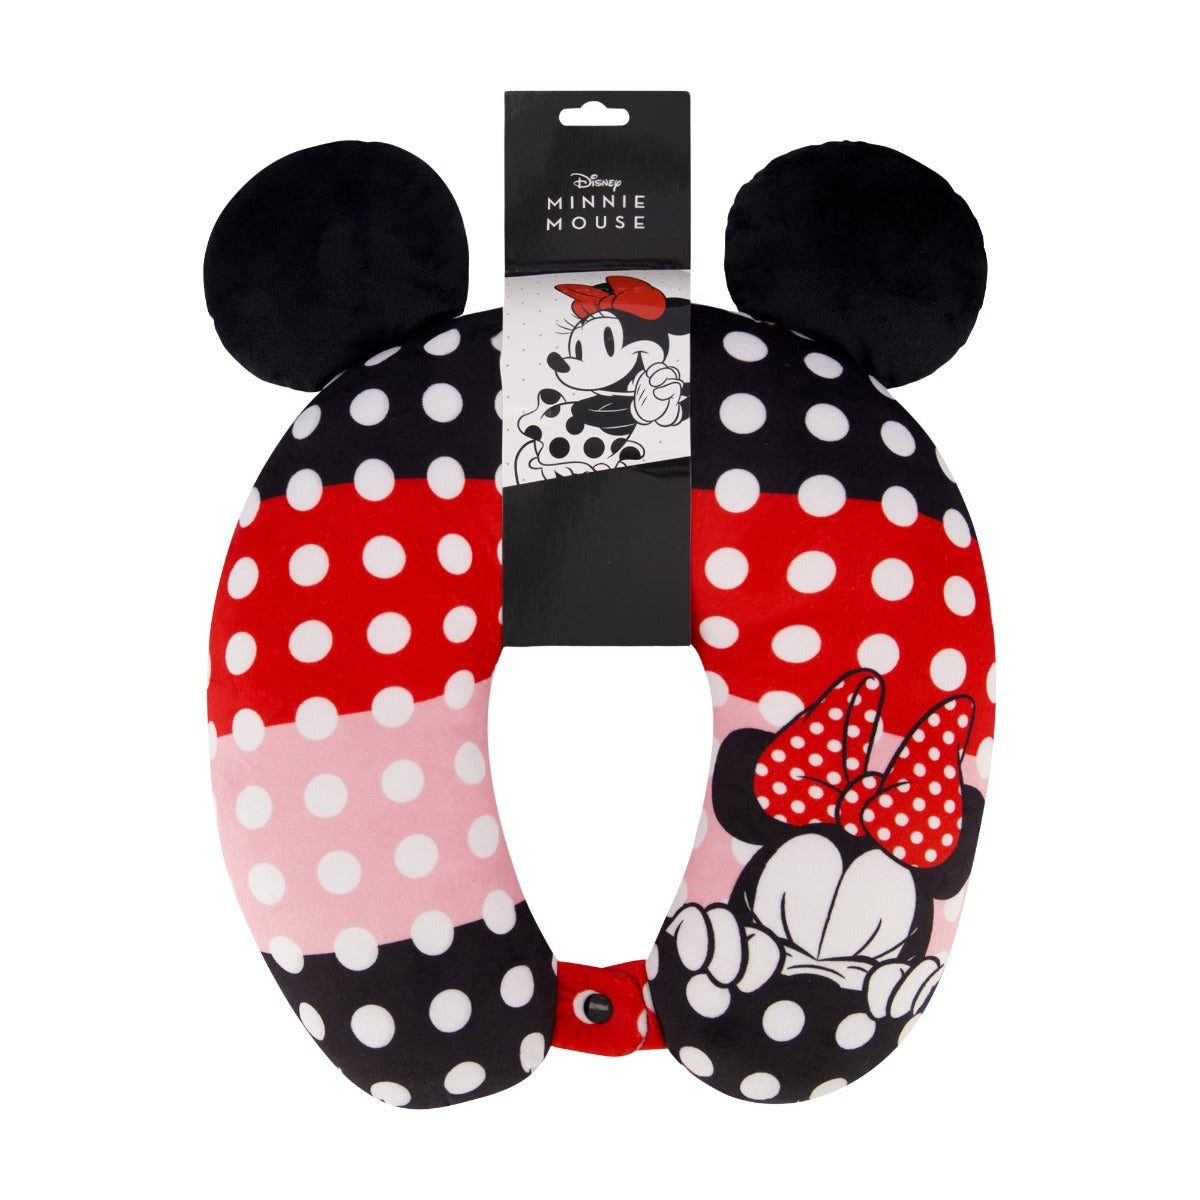 Ful disney minnie mouse three color polka dot ears neck pillow red black pink - best supportive and comfortable travel pillows for traveling